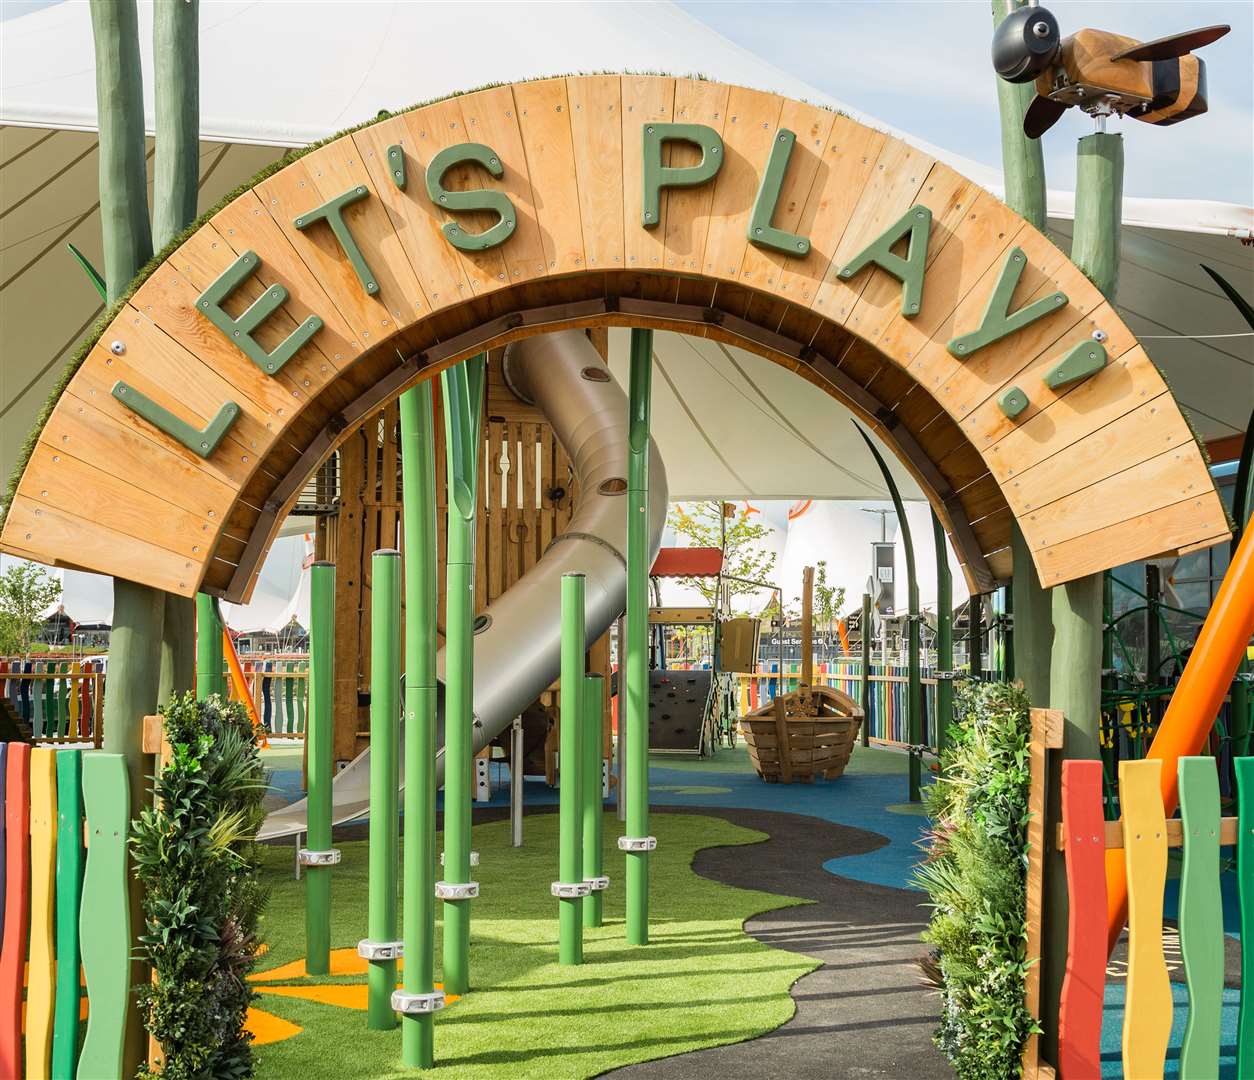 The play area cost £400,000